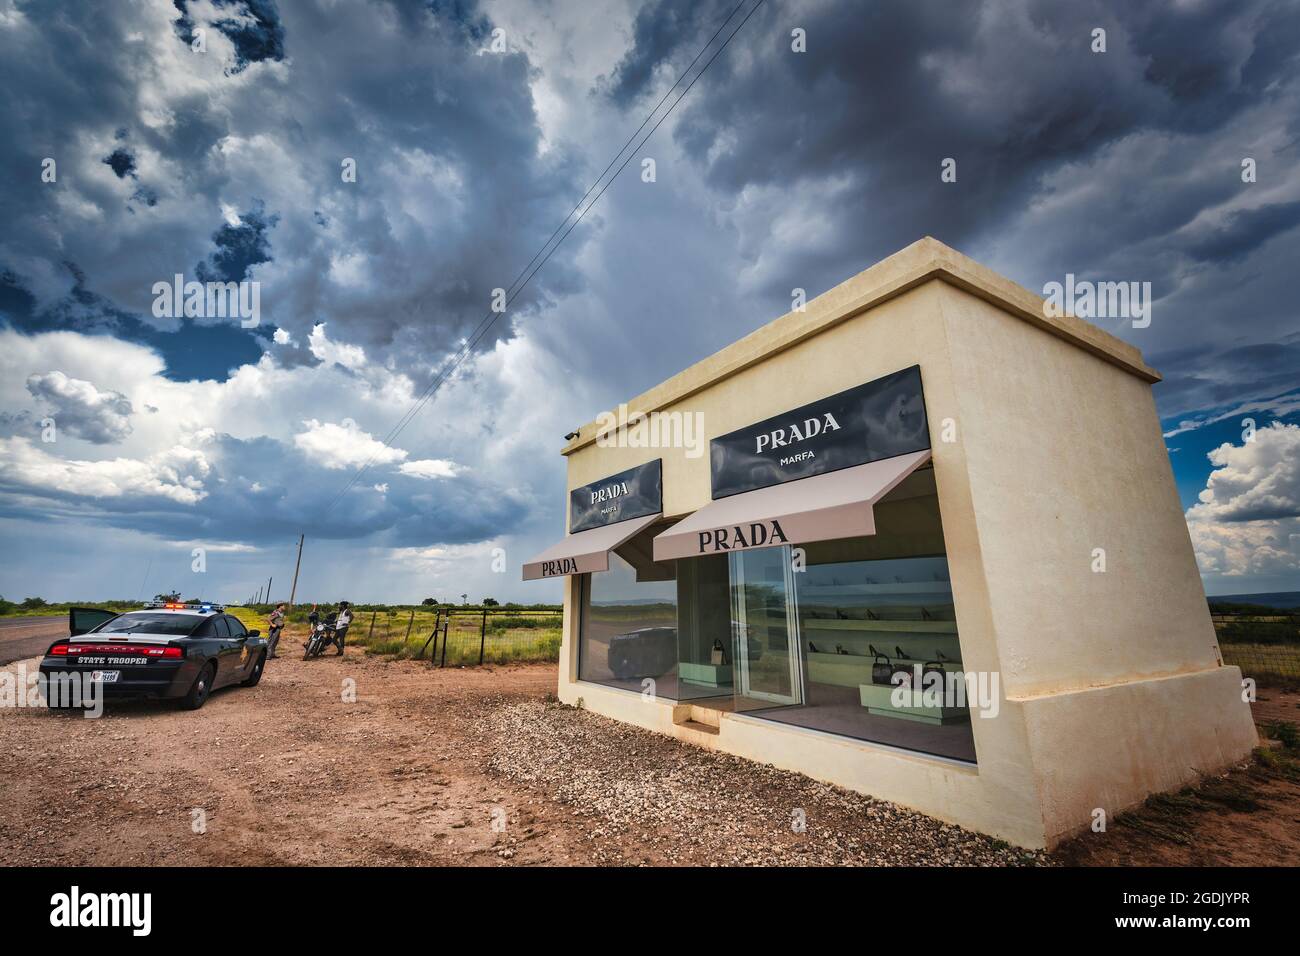 A Texas State Trooper talks with a motorcyclist near this Prada Marfa  "sculpture" designed to look like a Prada store located in Marfa, Texas  northwes Stock Photo - Alamy